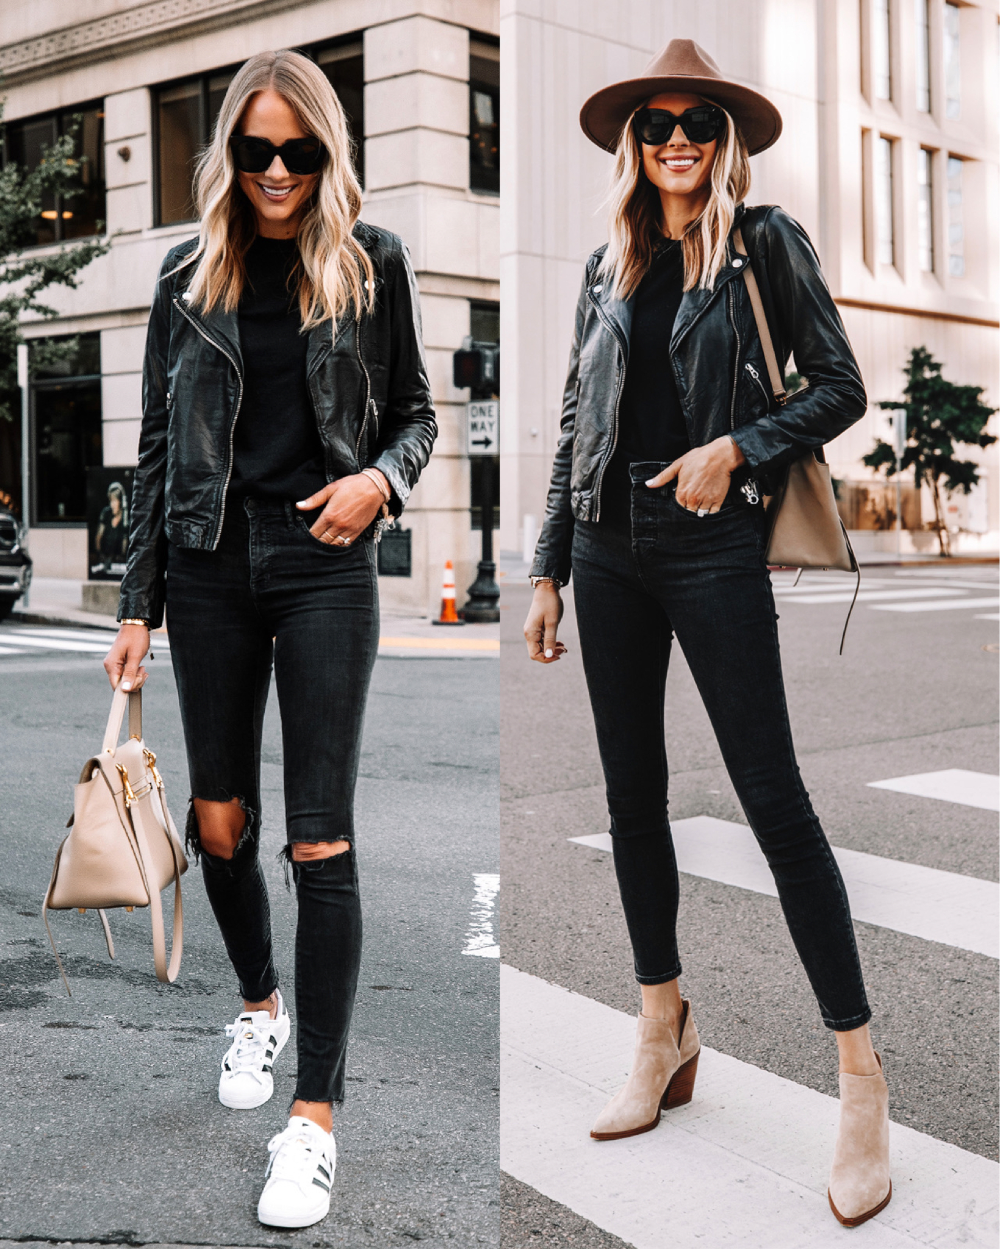 How to Wear Leather Motorcycle Jacket: Top 15 Outfit Ideas for Ladies